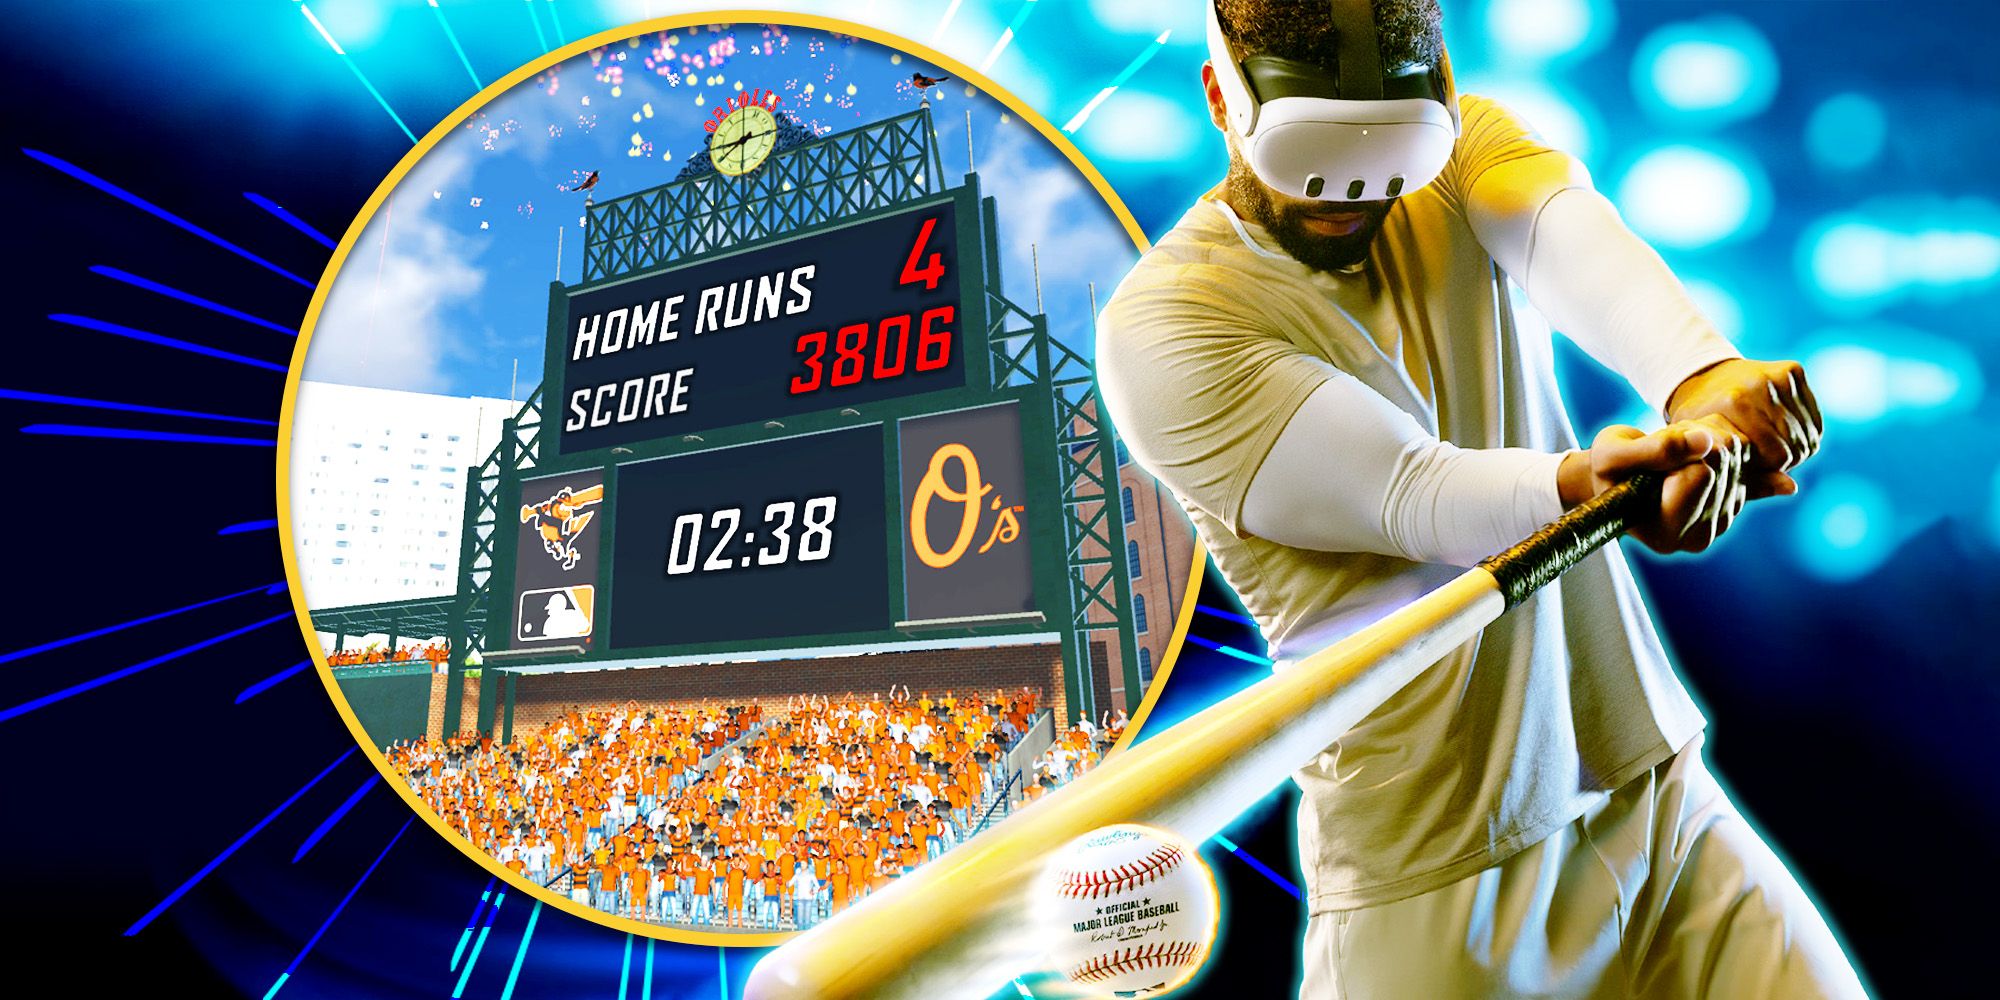 MLB HRD VR Header showing a man in a Meta Quest headset hitting a ball on the right, a scoreboard at Camden Yards counting home runs on the left.